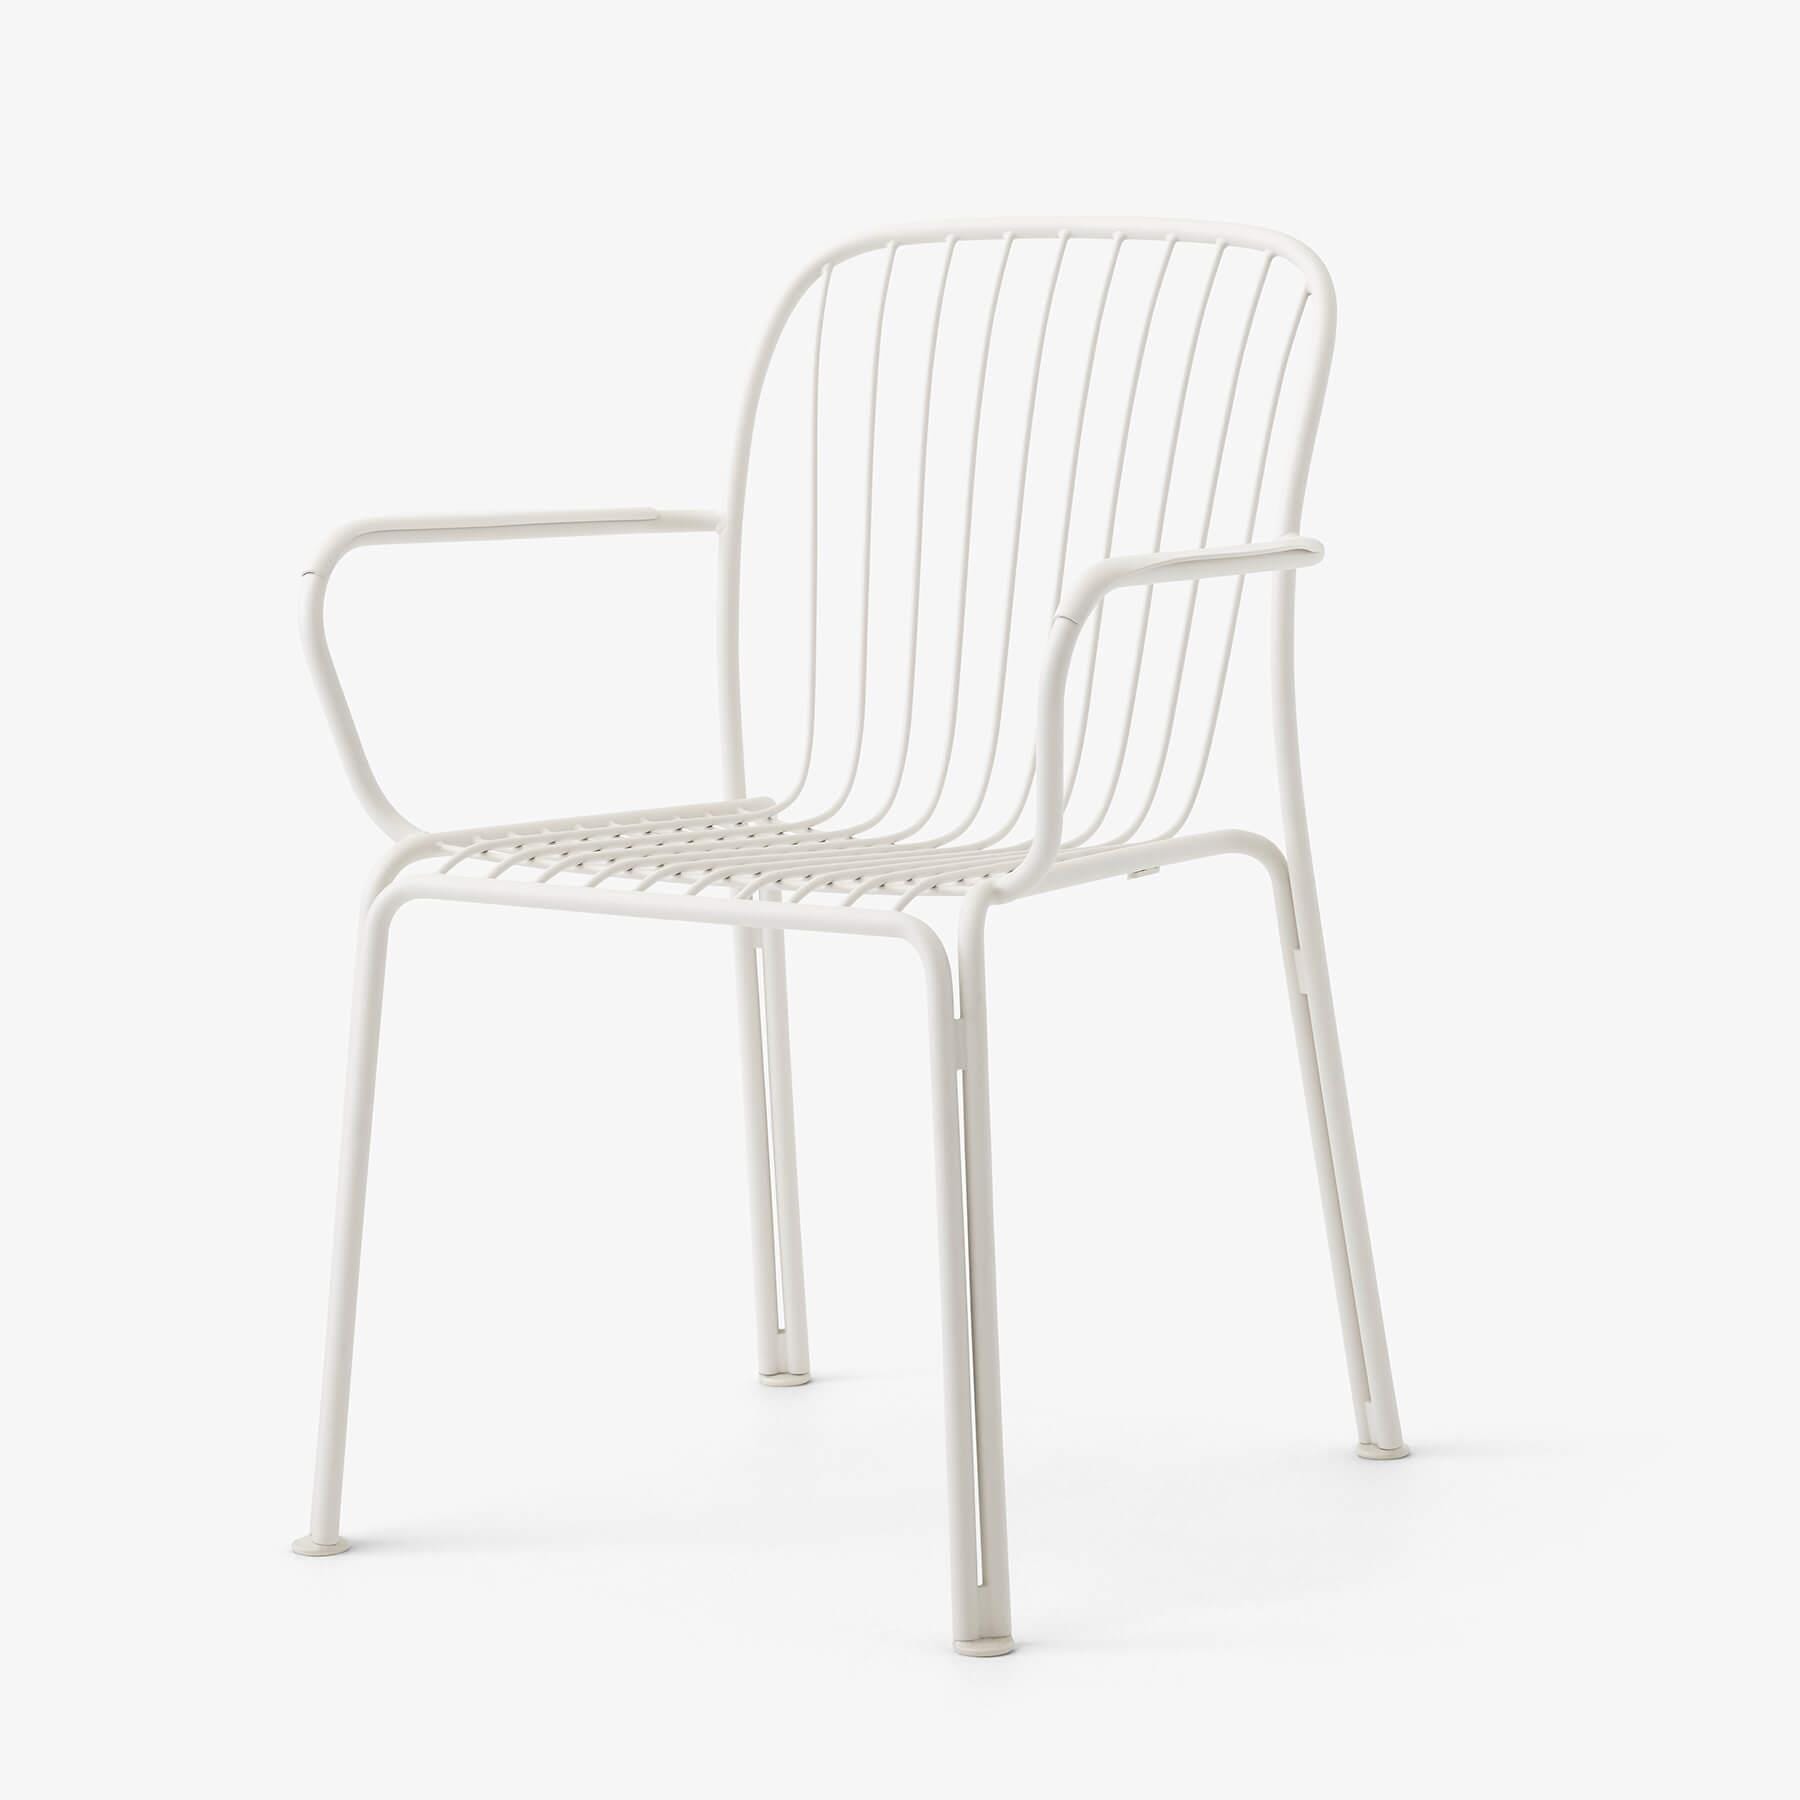 Tradition Thorvald Sc95 Outdoor Chair Ivory White